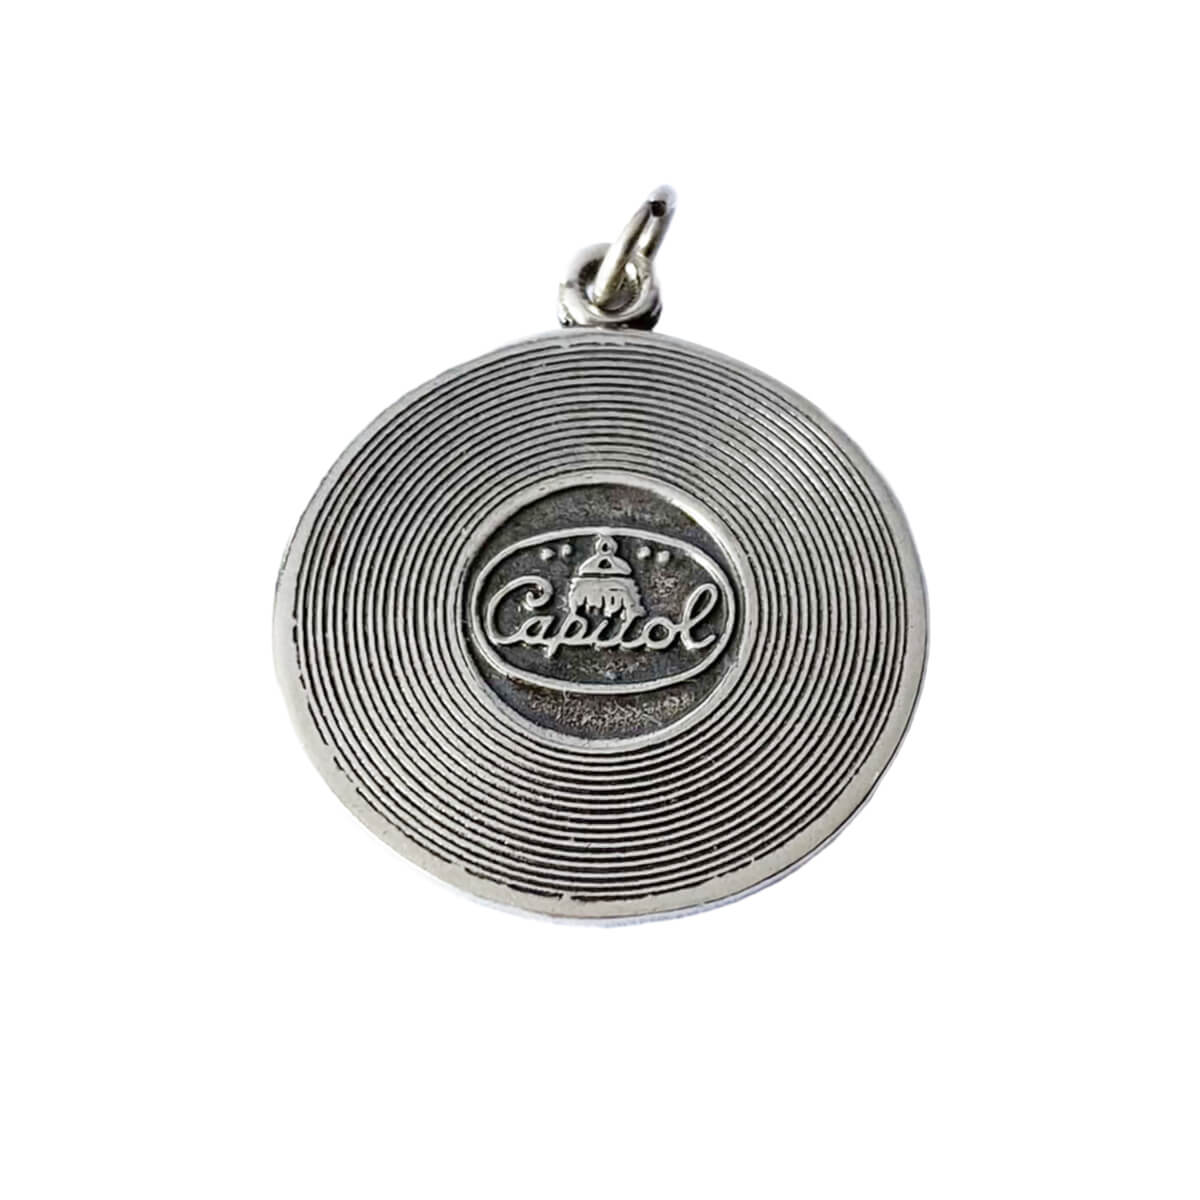 Vintage record charm sterling silver music pendant from Charmarama